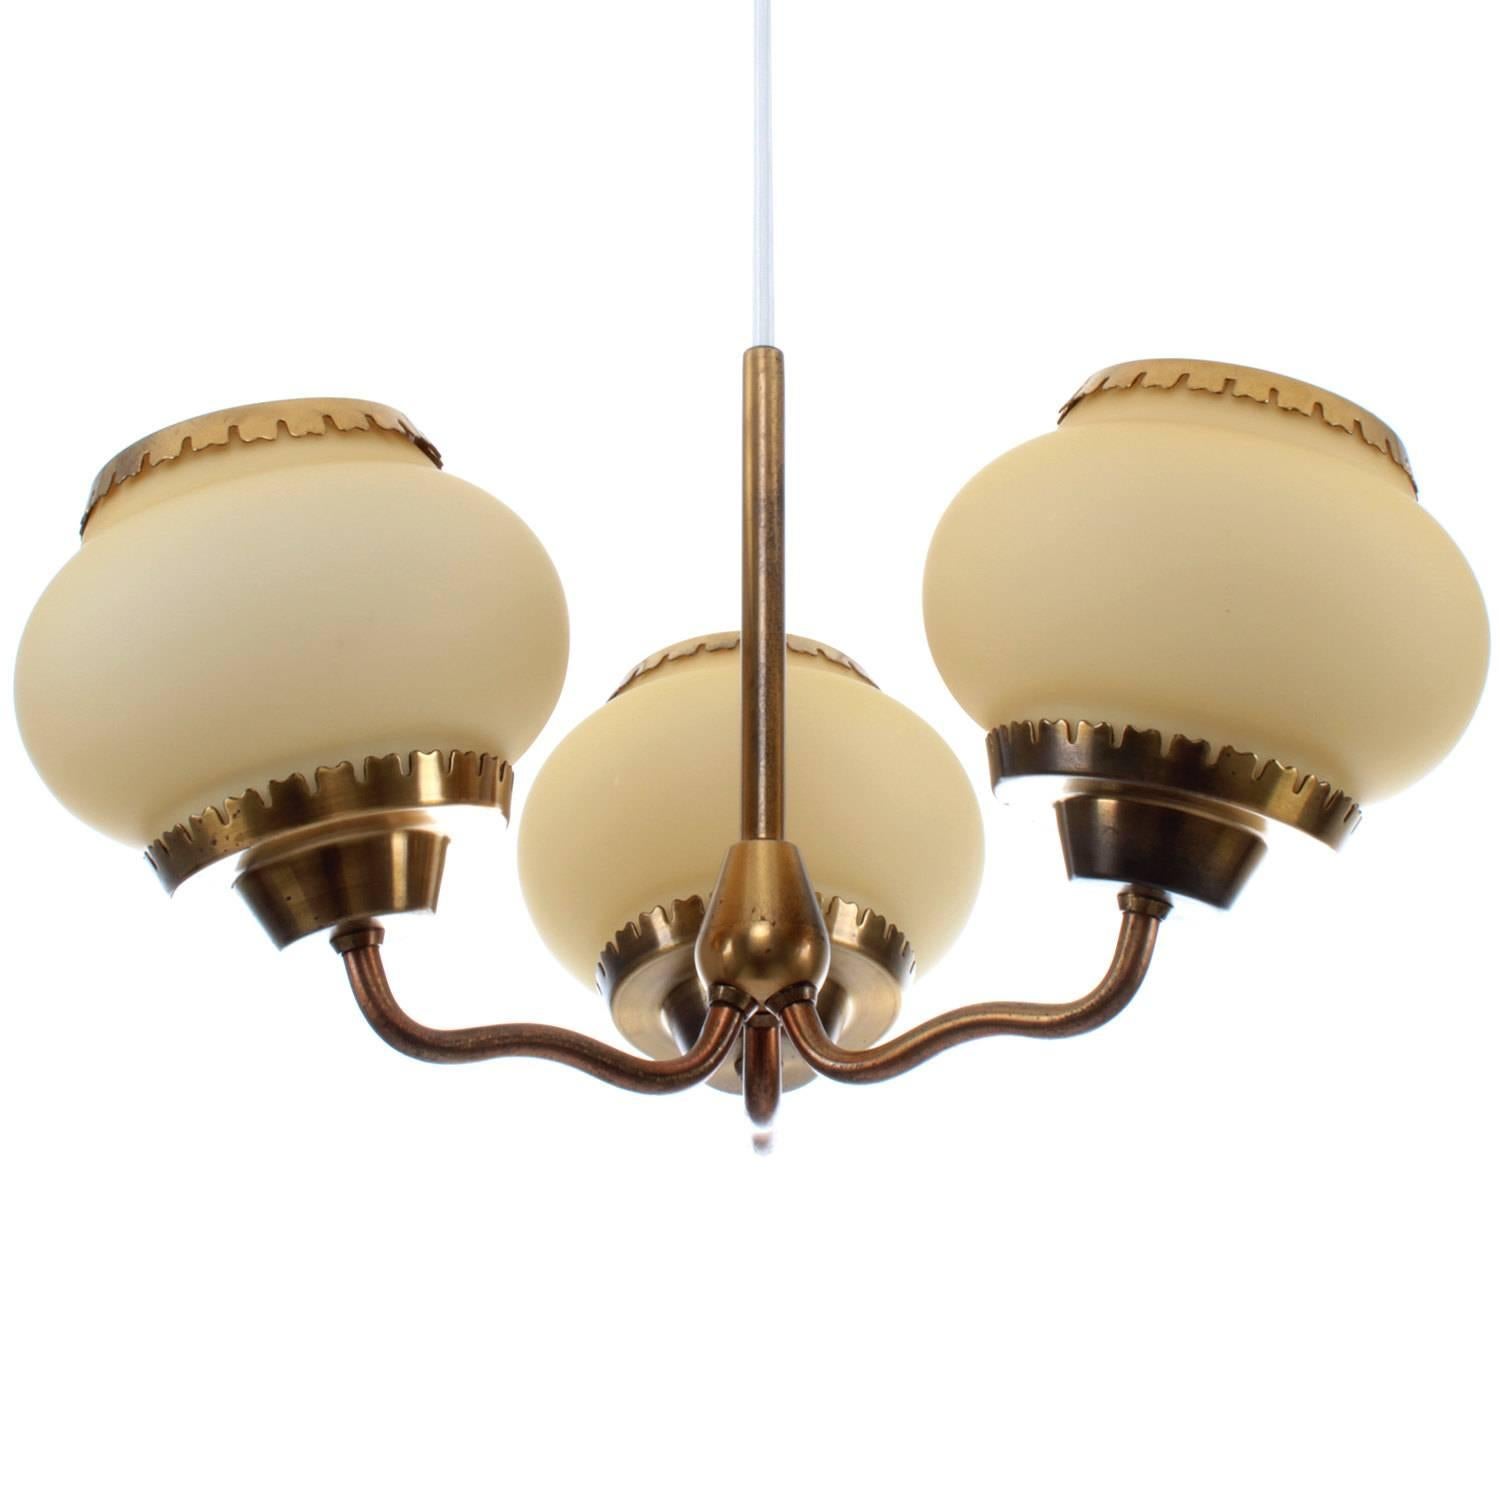 Mid-Century Modern Three-Light Chandelier, Opal and Brass by Bent Karlby for Lyfa, 1940s For Sale